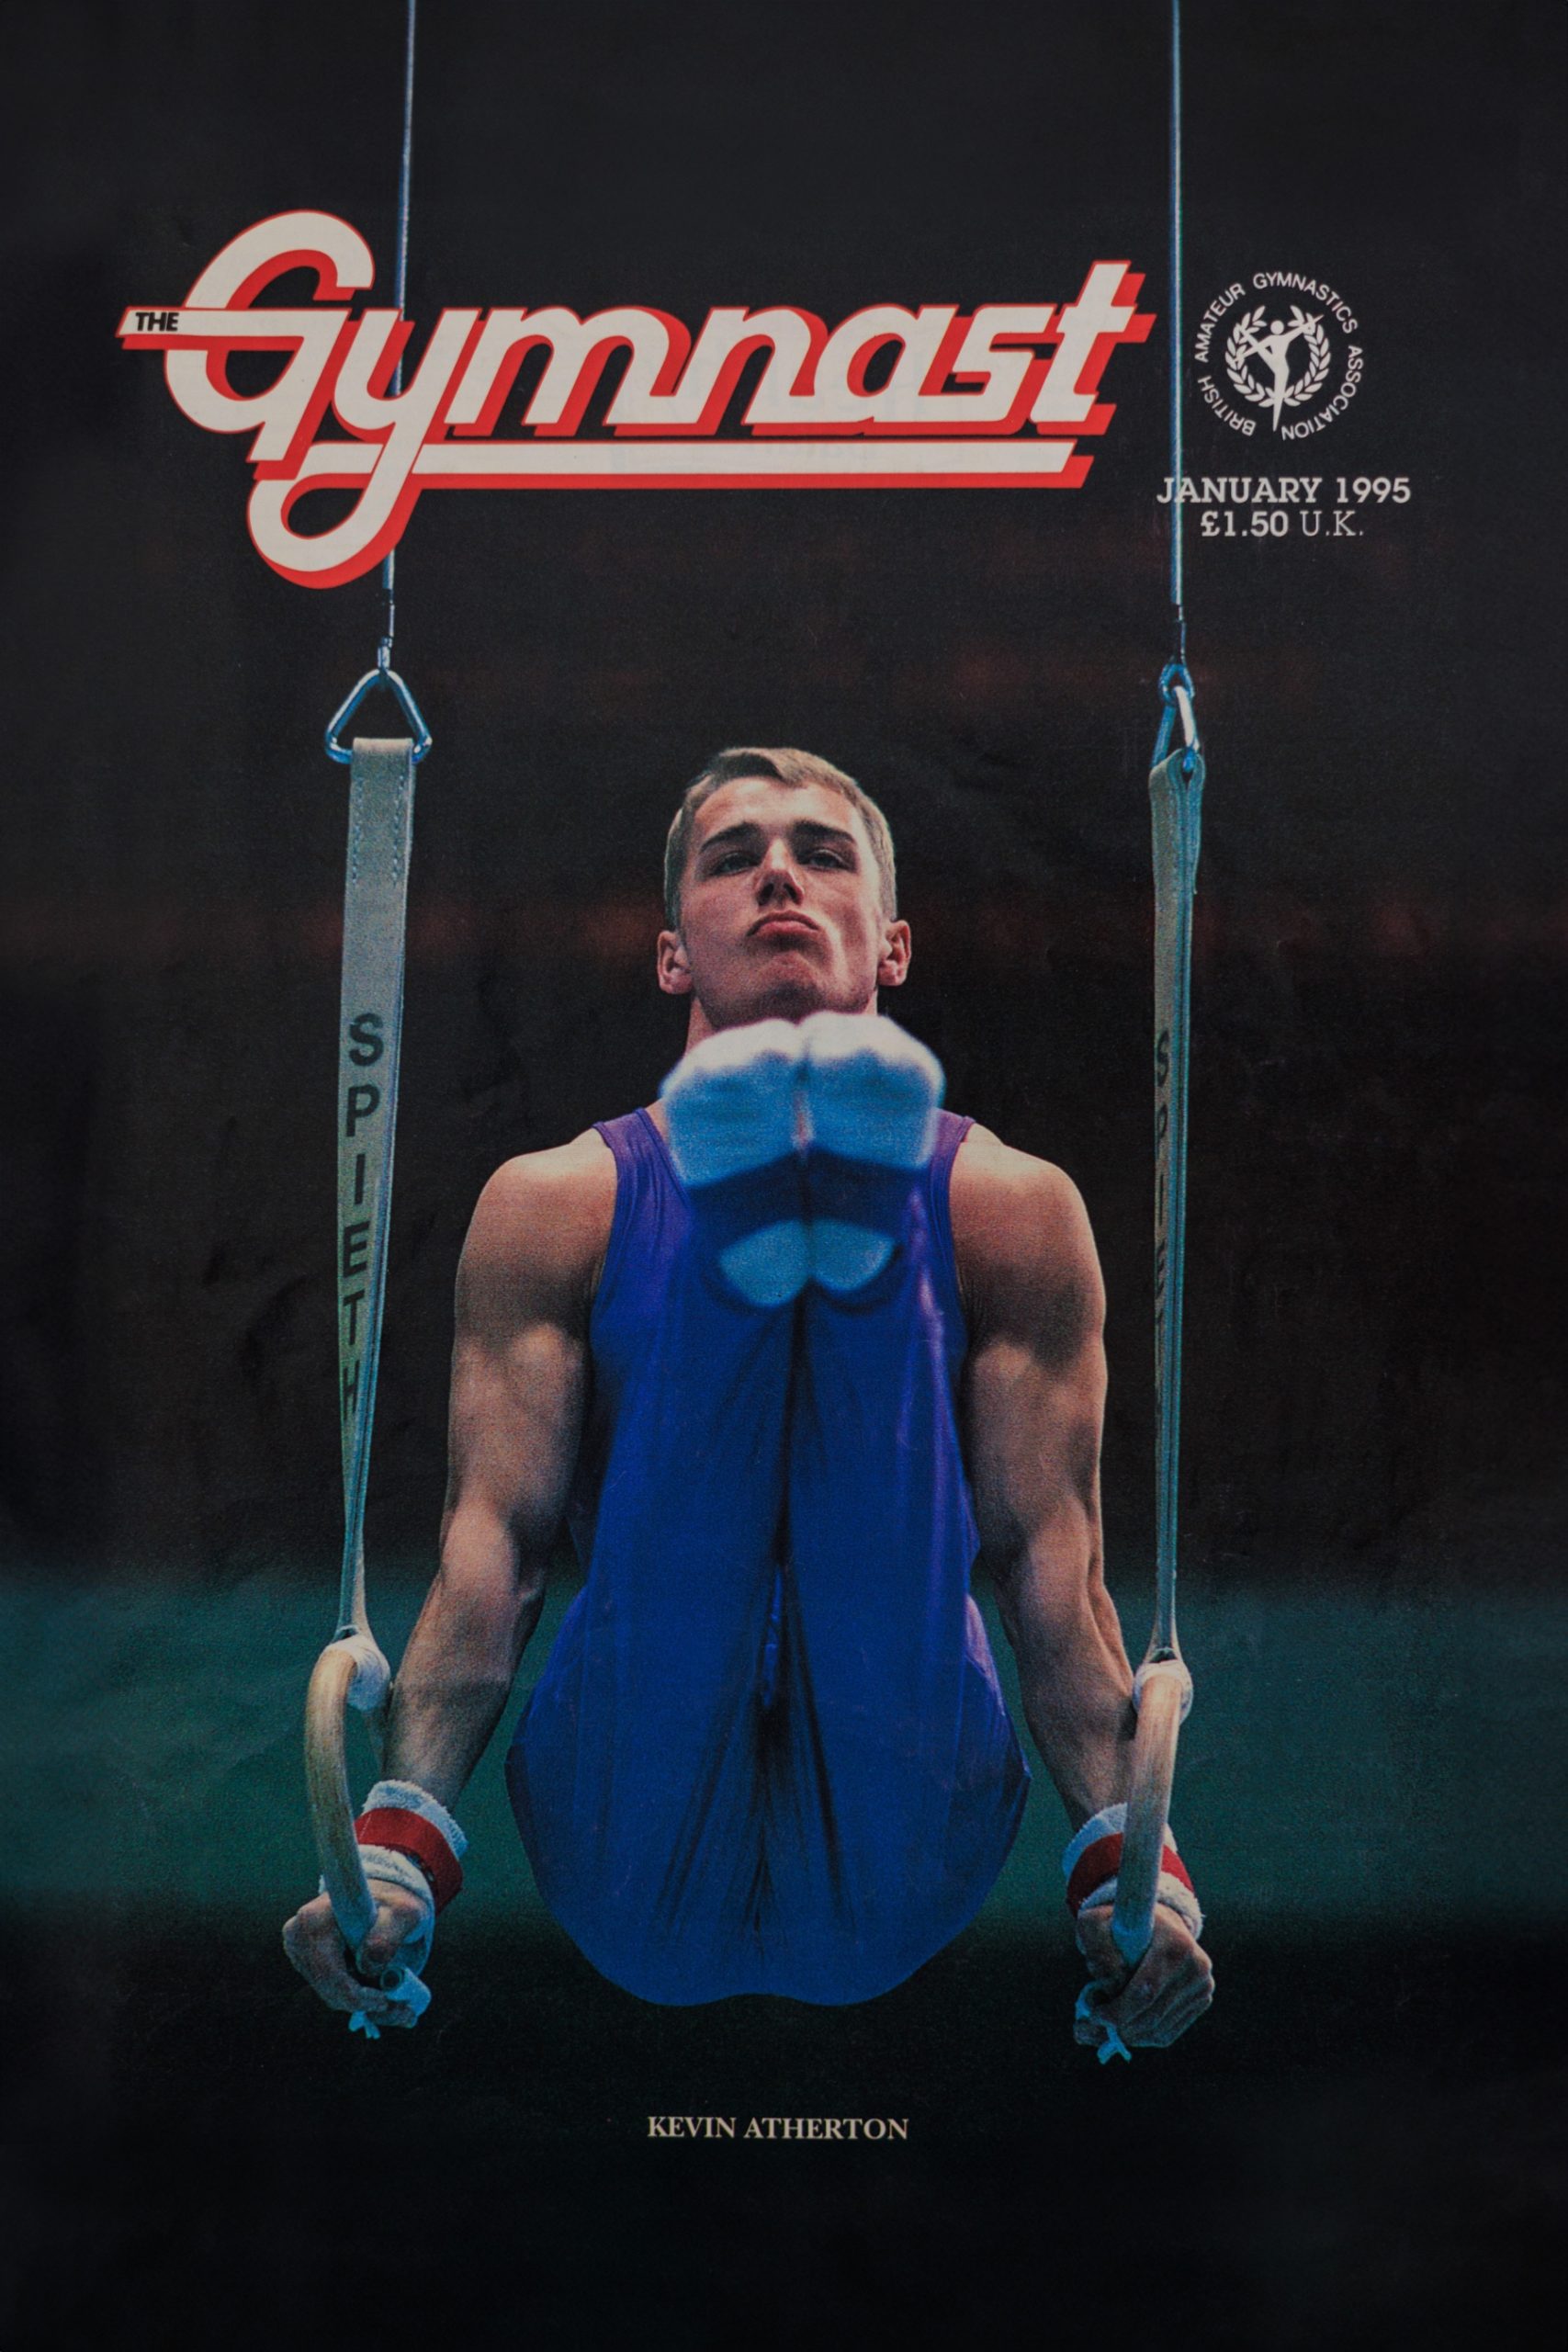 Kevin Atherton on the front cover of The Gymnast Magazine in 1995 - photo Eileen Langsley/International Gymnast